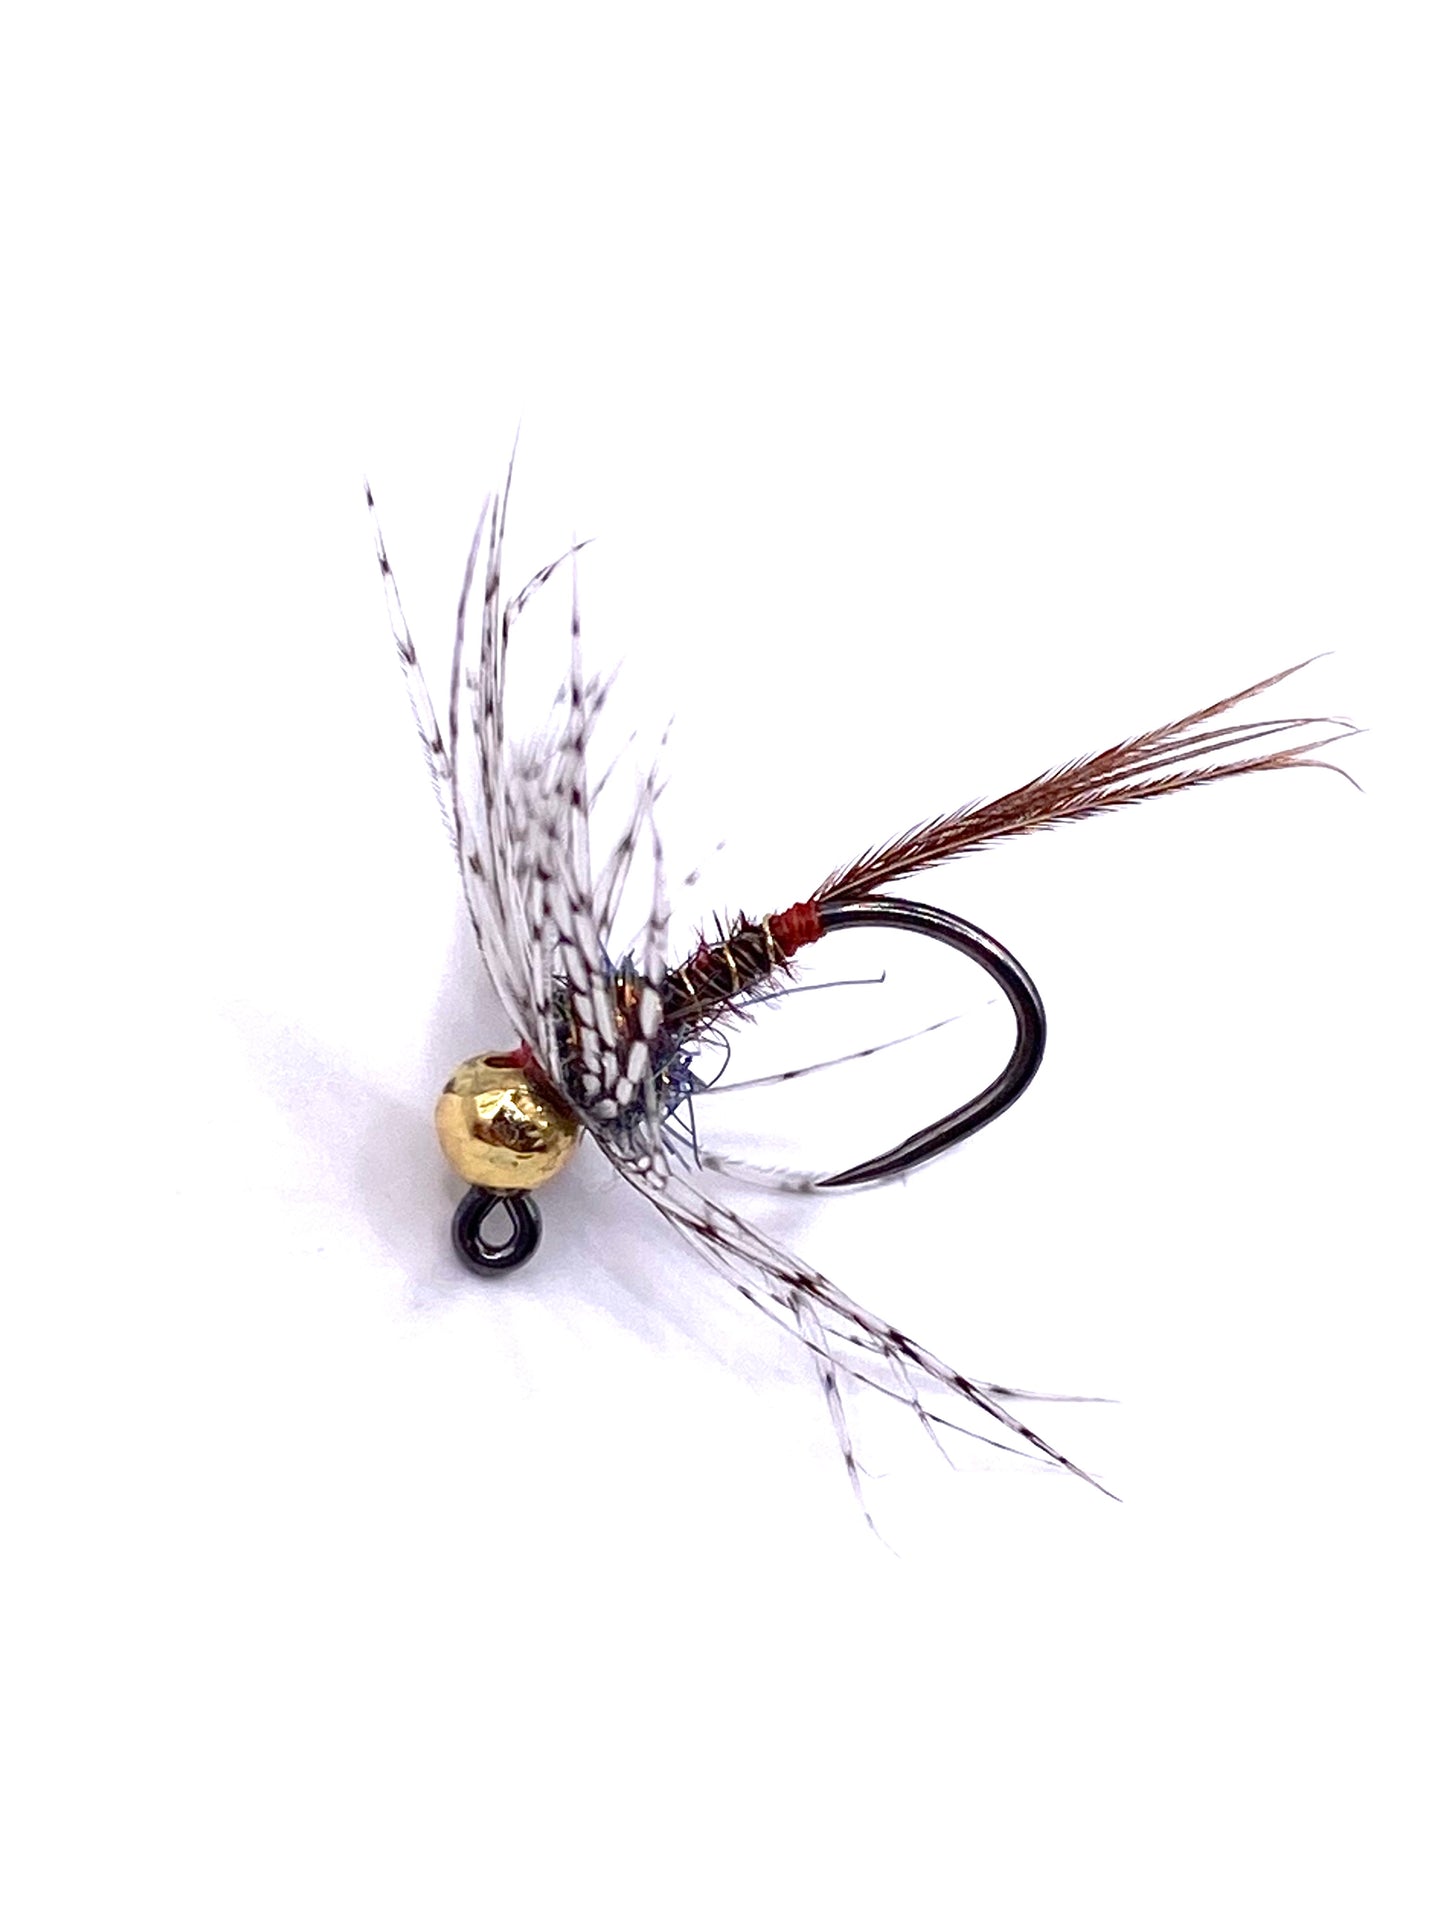 Soft hackle pheasant tail